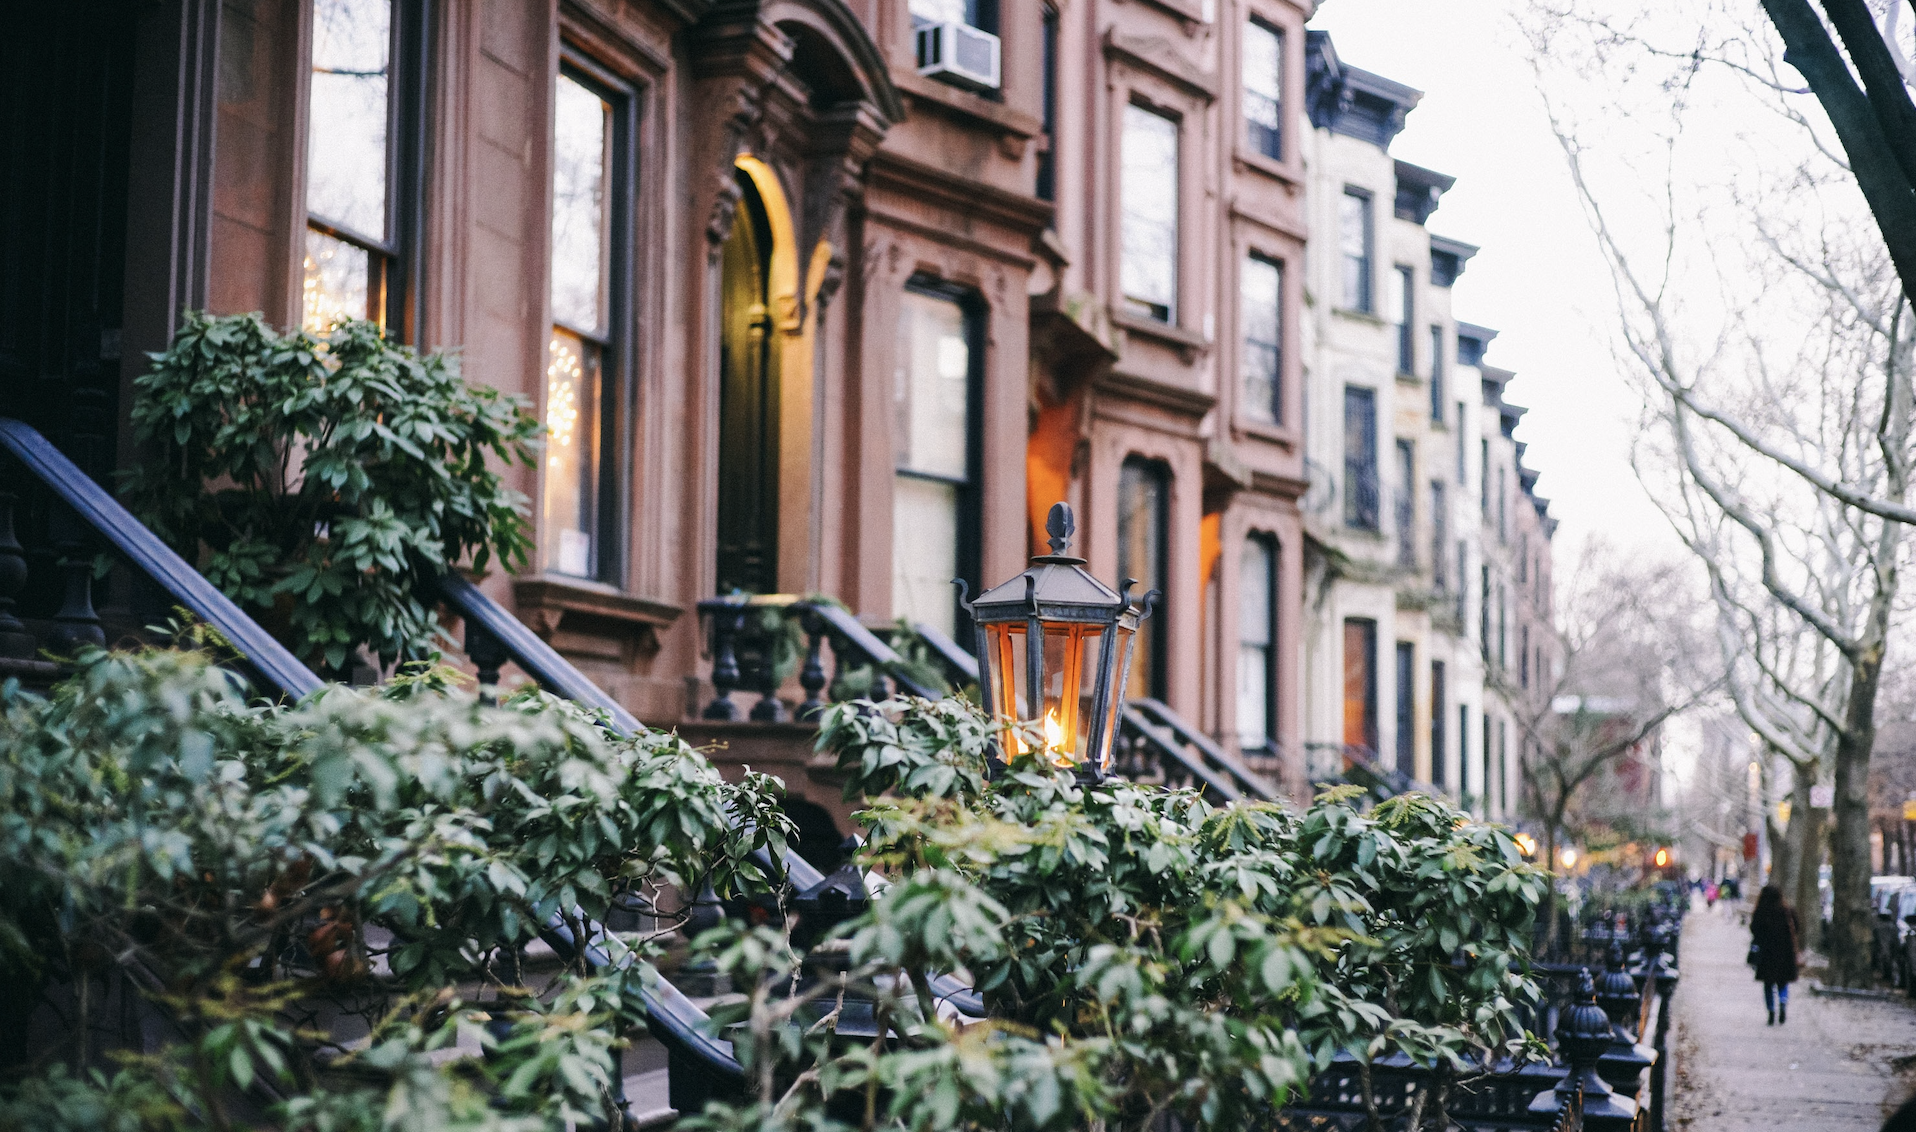 New York street, with emphasis on brownstone homes and greenery.